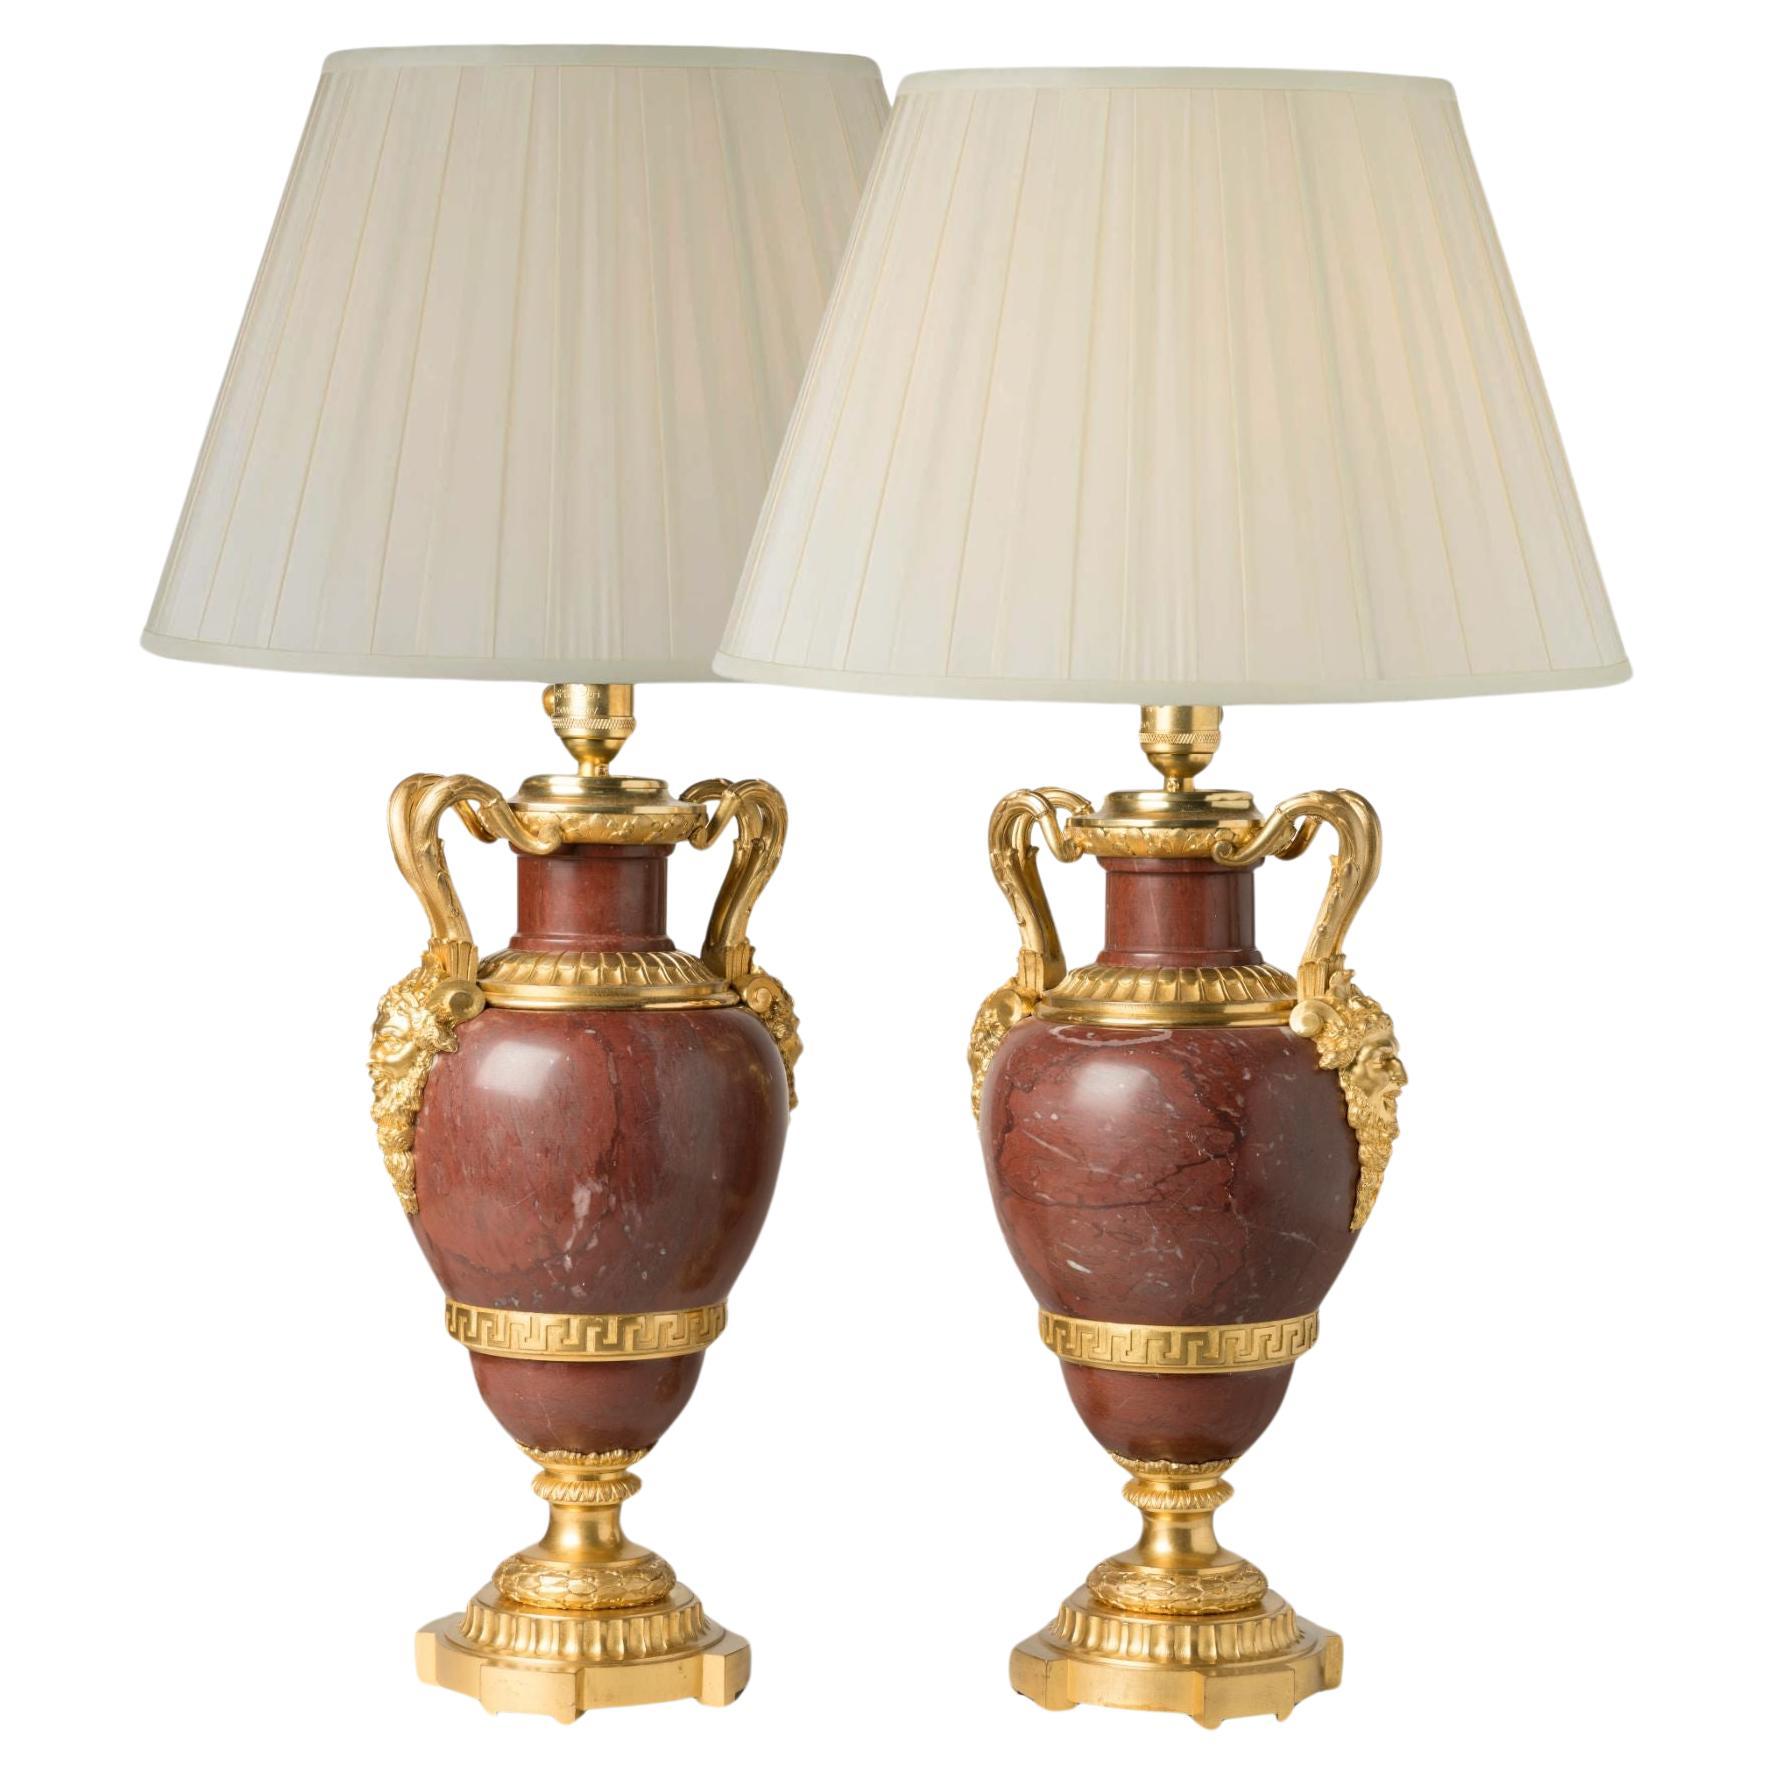 Pair of 19th Century French Red Marble Antique Lamps with Bronze Doré Mounts For Sale